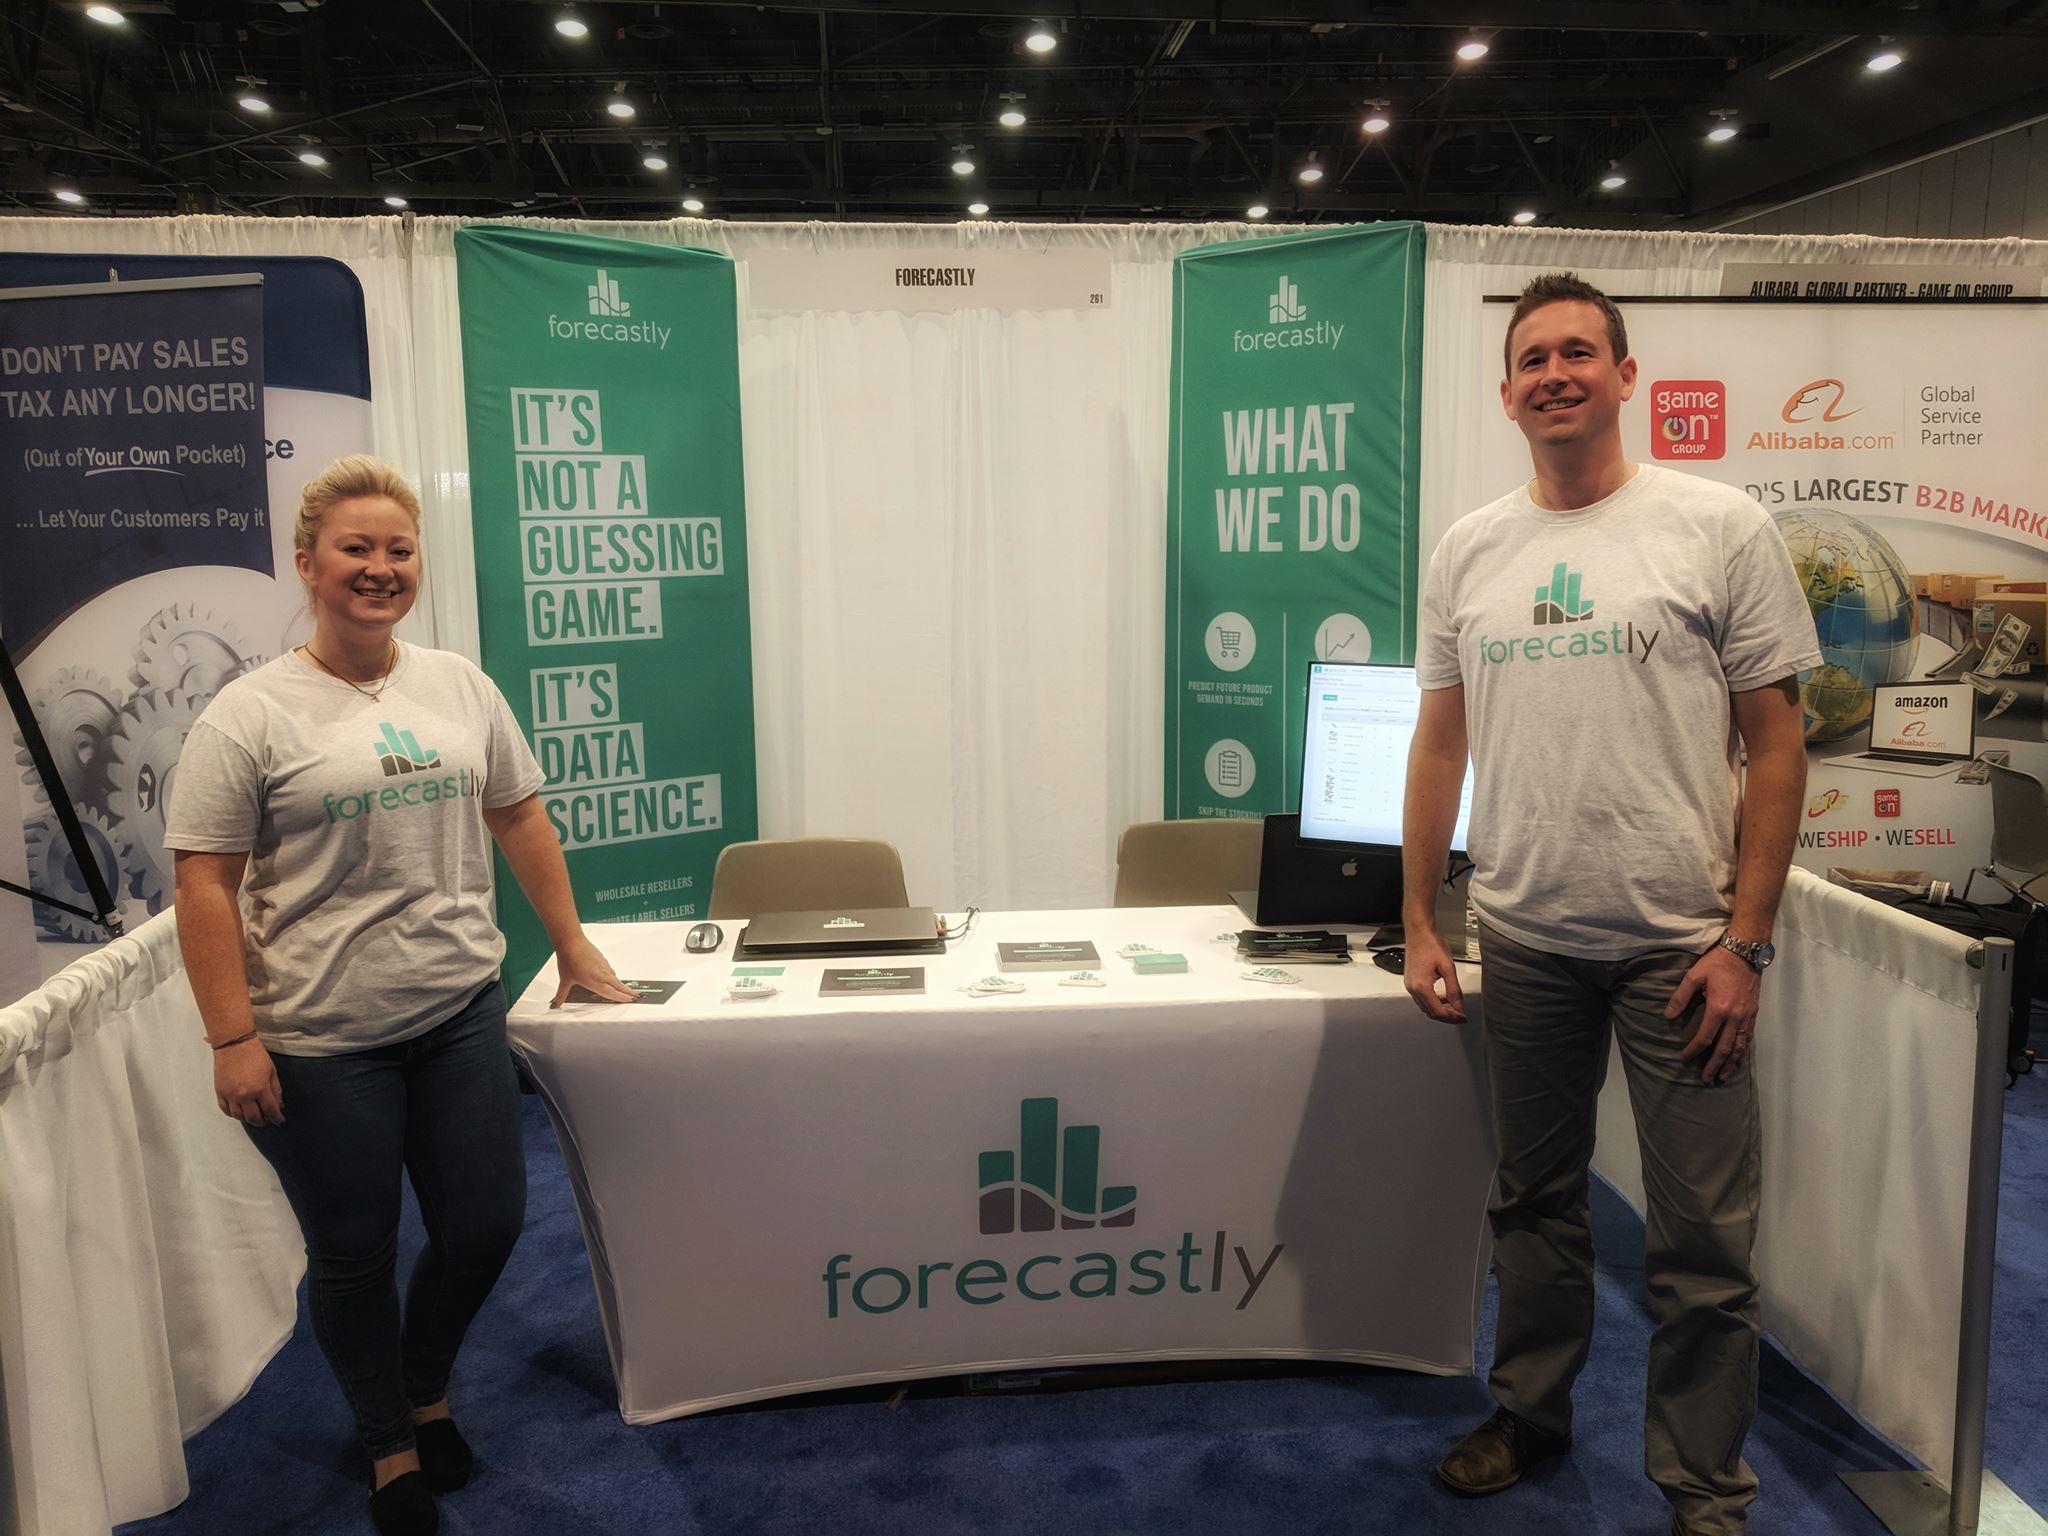 Trade show booth with Forecastly branded table cover, featuring company logo and tagline, with two smiling representatives